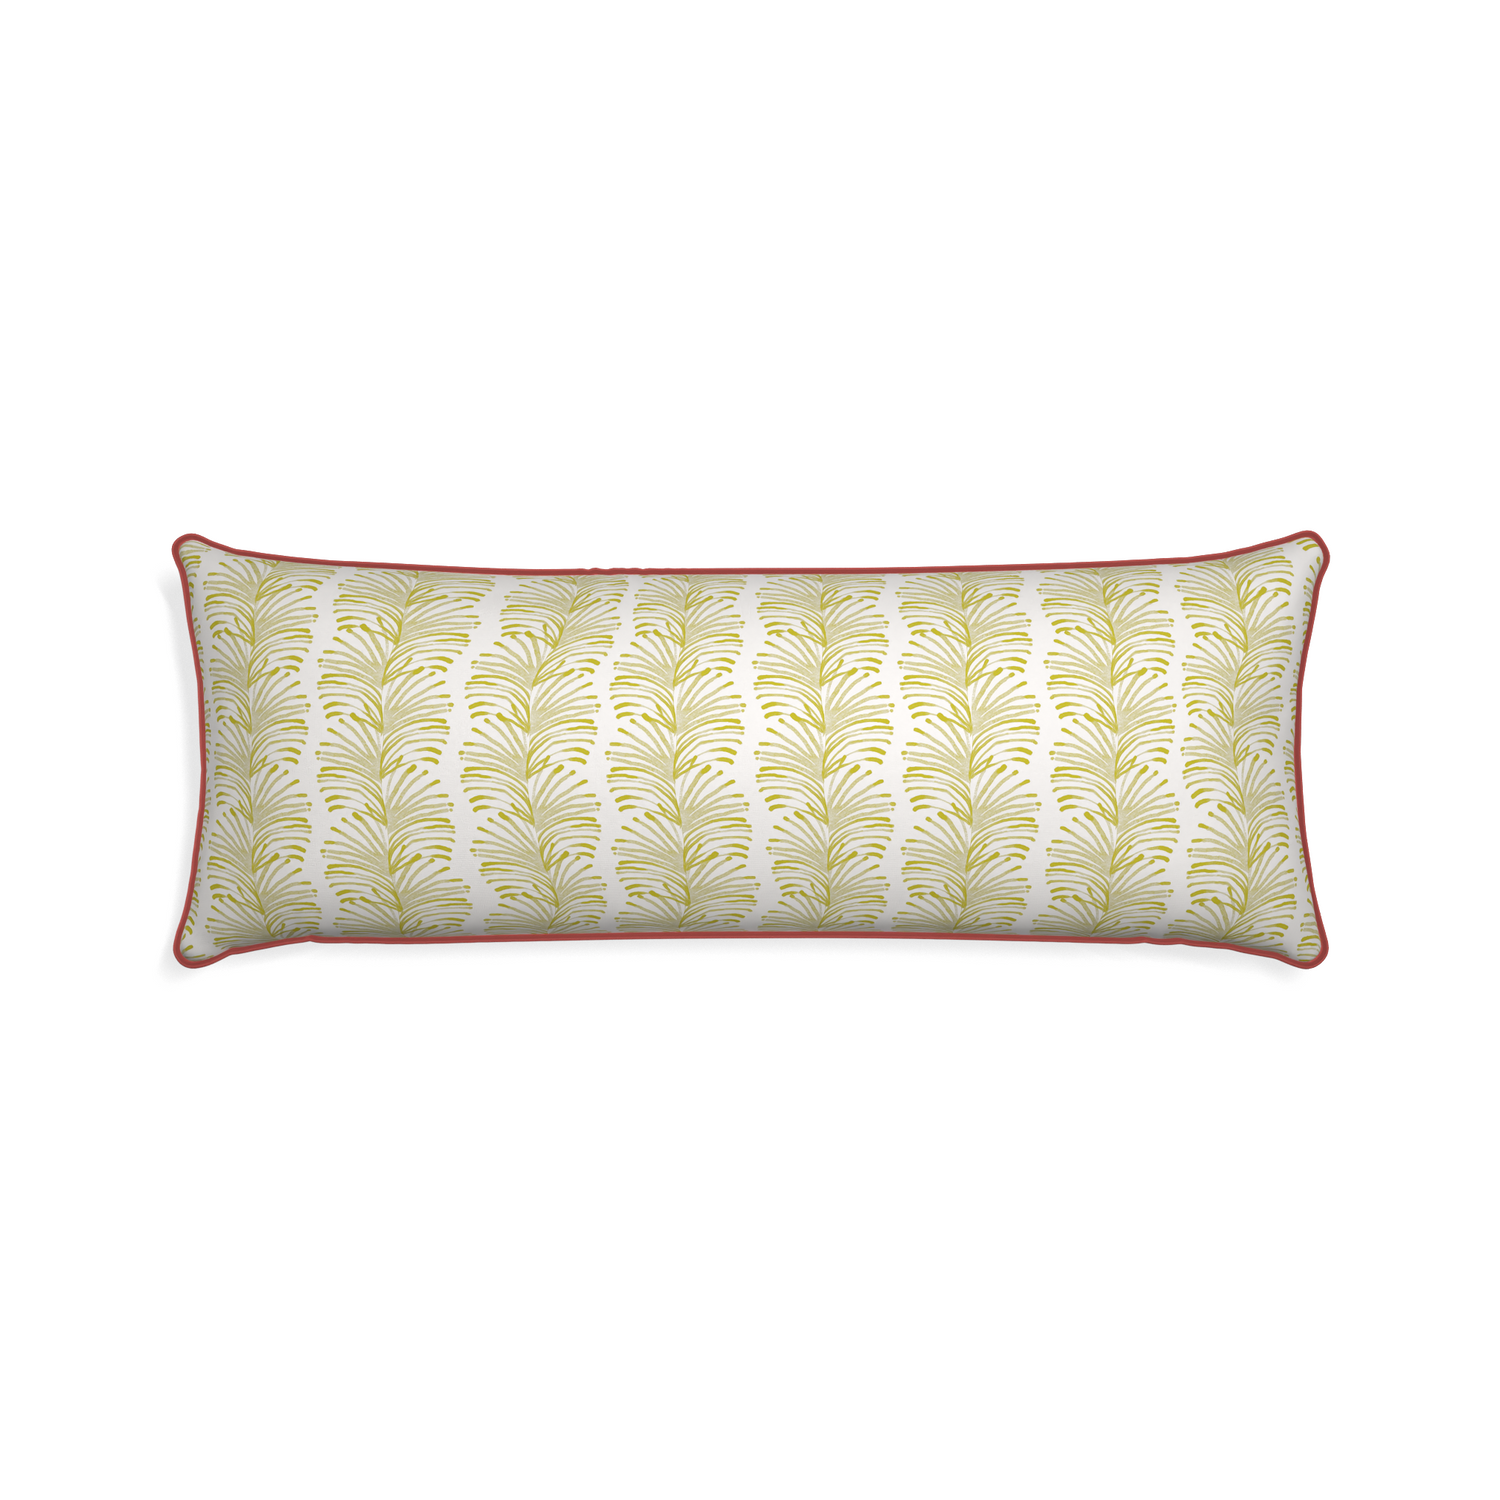 Xl-lumbar emma chartreuse custom pillow with c piping on white background